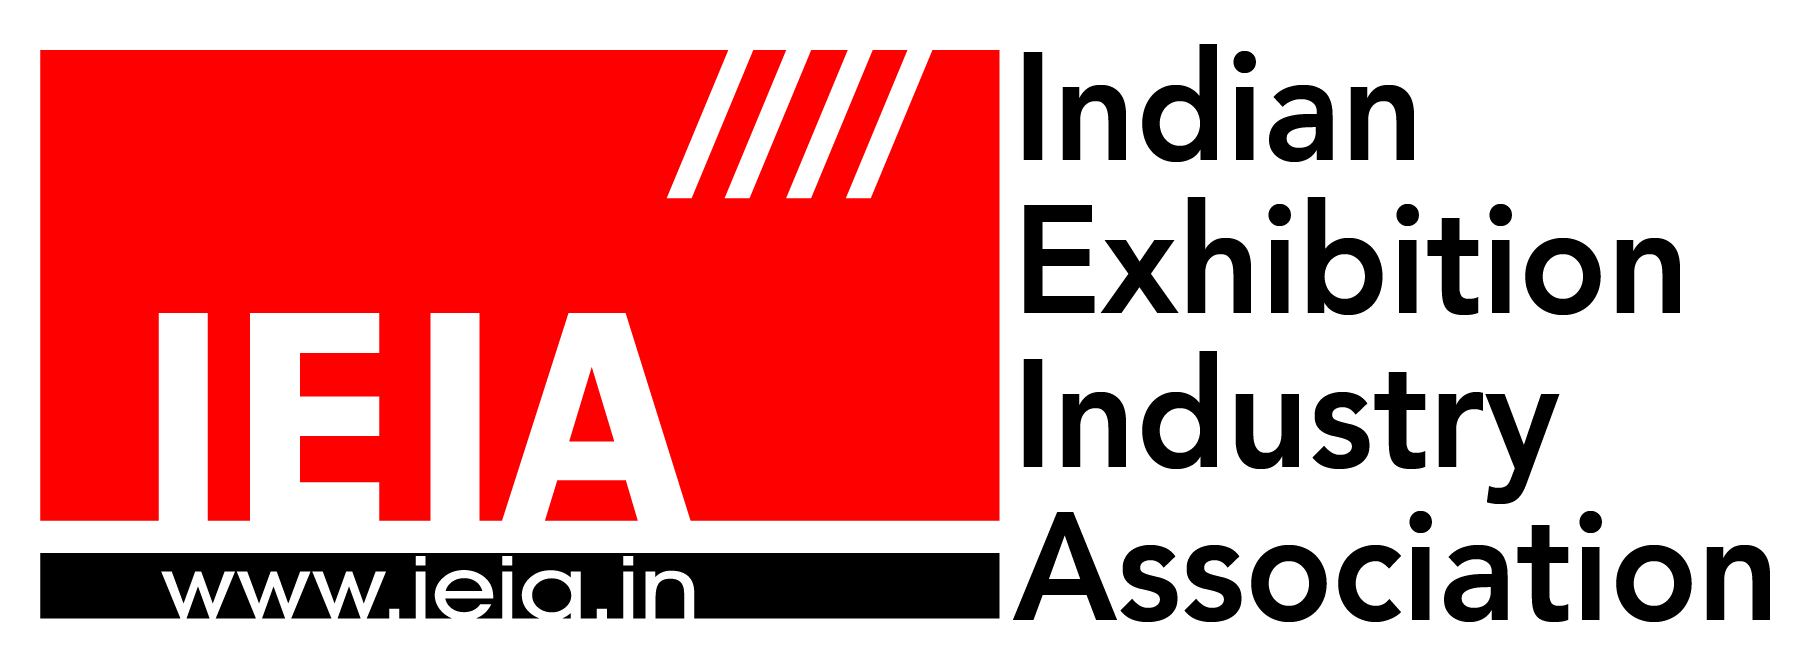 IEIA Indian Exhibition Industry Association